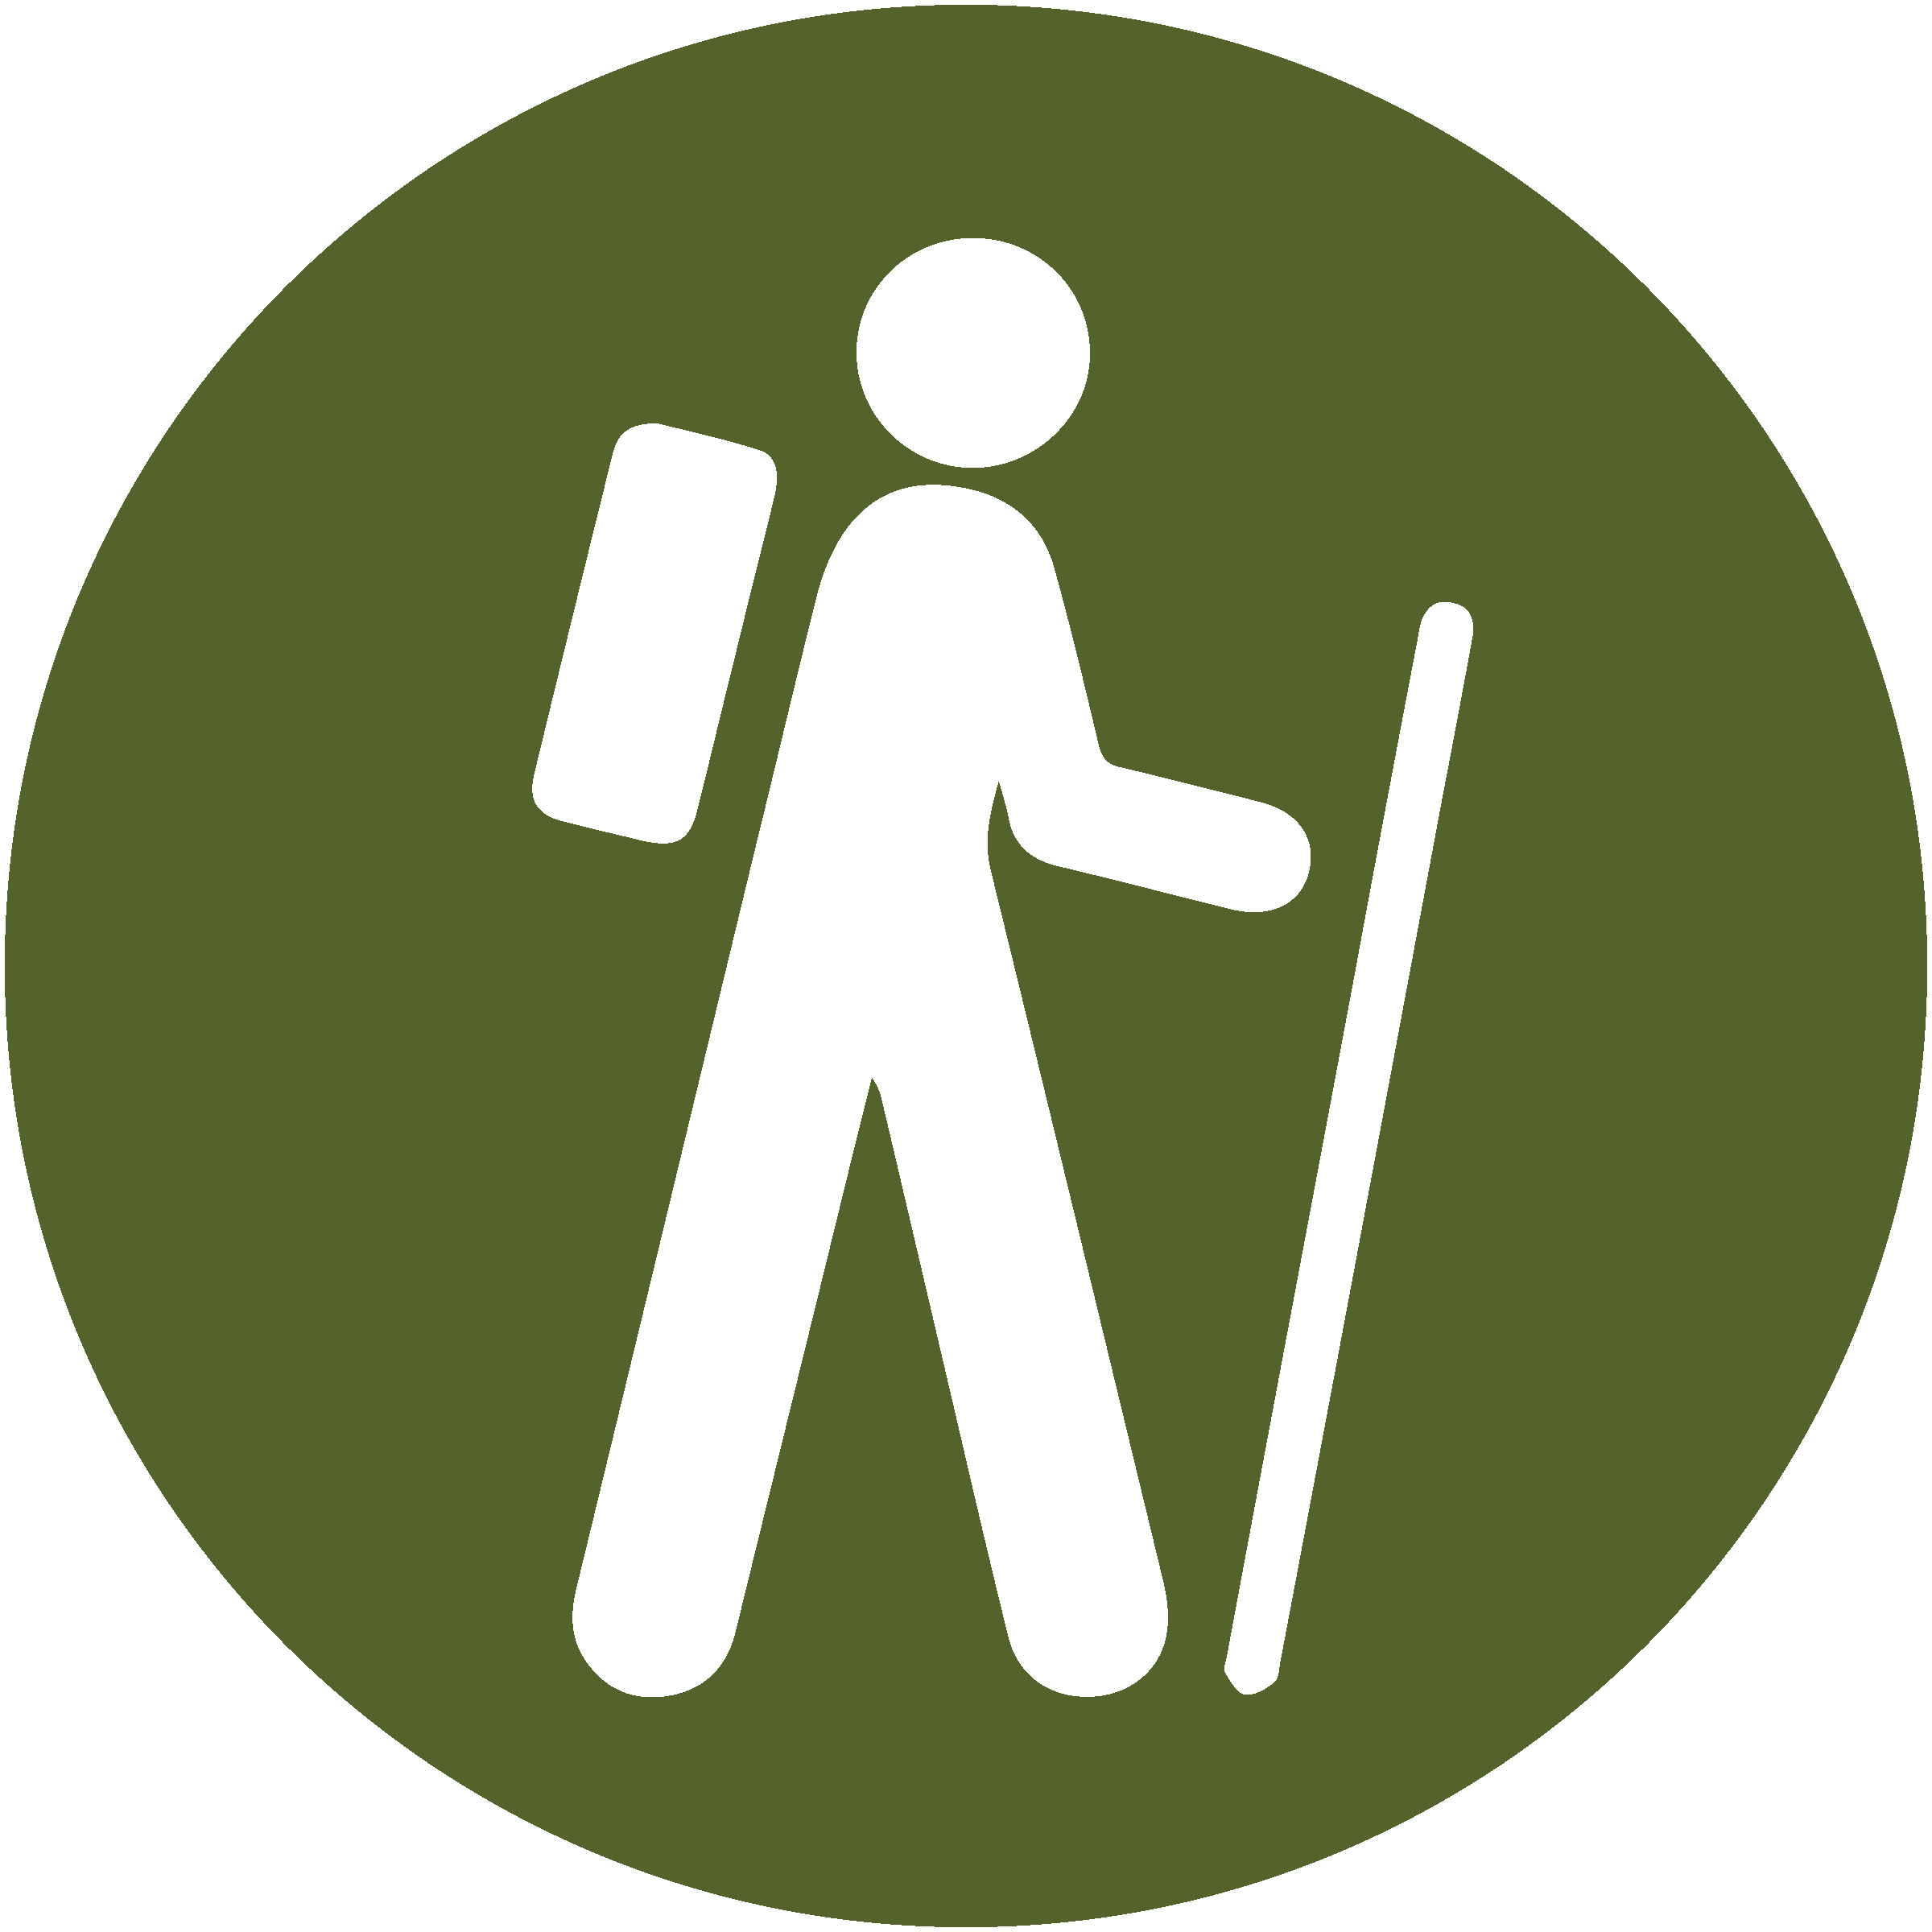 icon of person walking wearing backpack and with walking stick